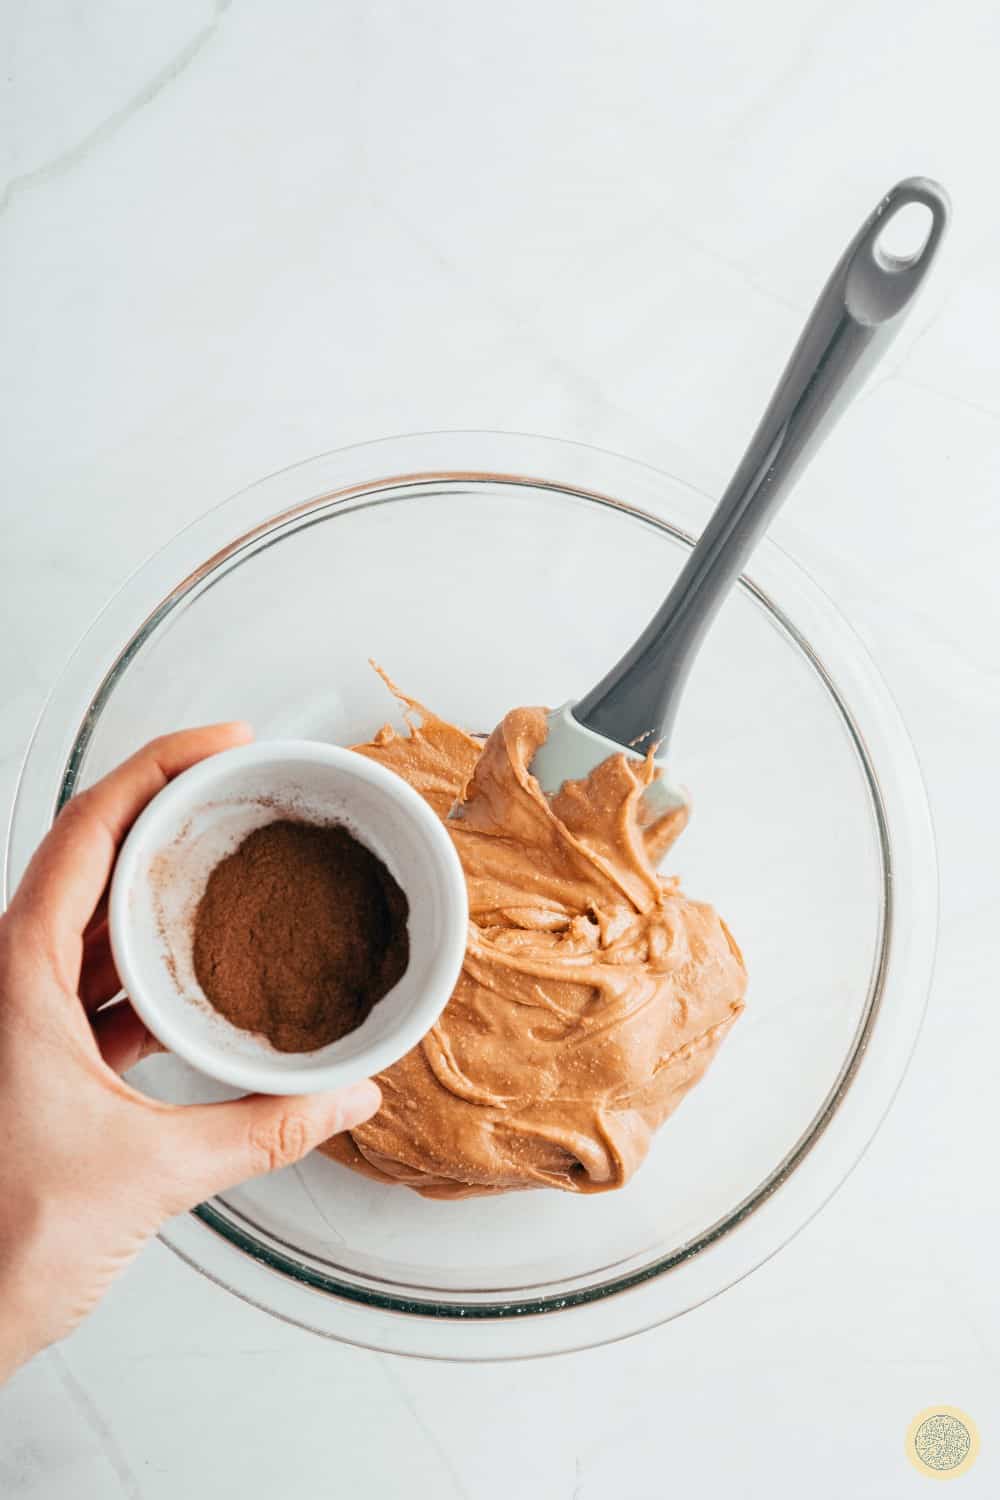 In a large bowl, add your cashew butter, vanilla, and cinnamon. 